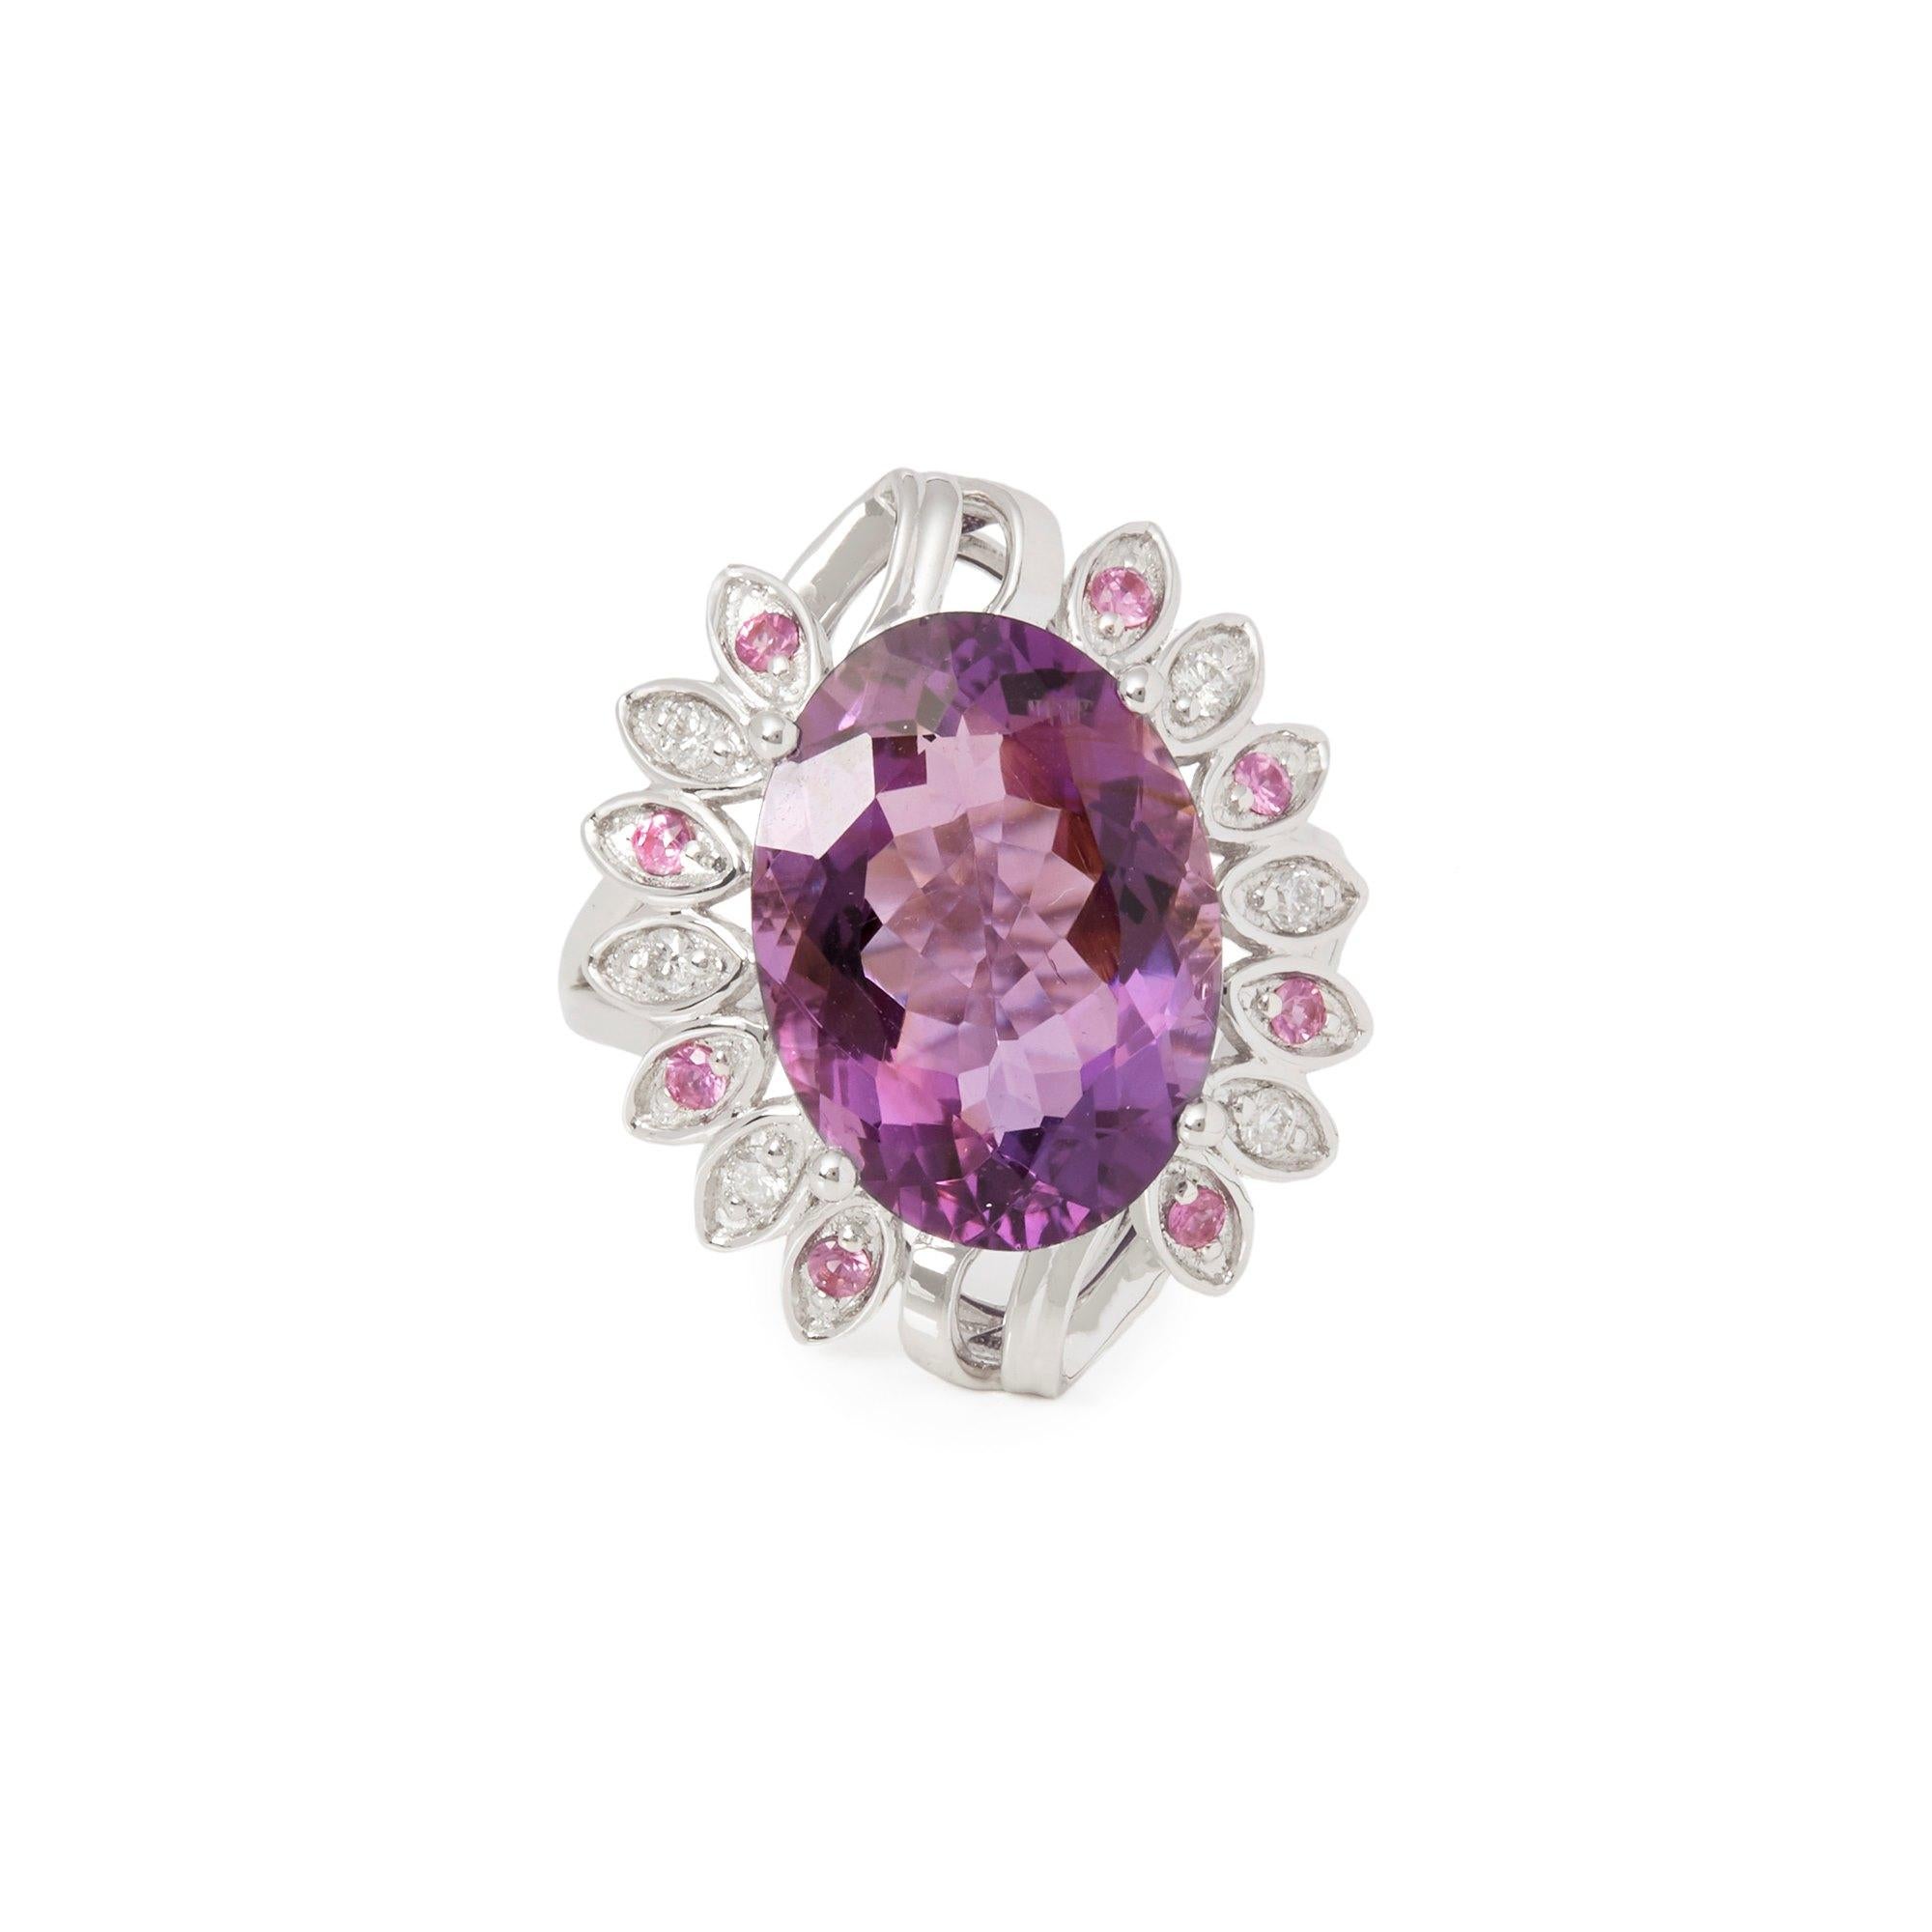 This ring designed by David Jerome is from his private collection and features one oval cut Amethyst totalling 7.07cts sourced in Russia. Set with round brilliant cut Diamonds and pink Sapphires mounted in an 18k white gold setting. UK finger size M